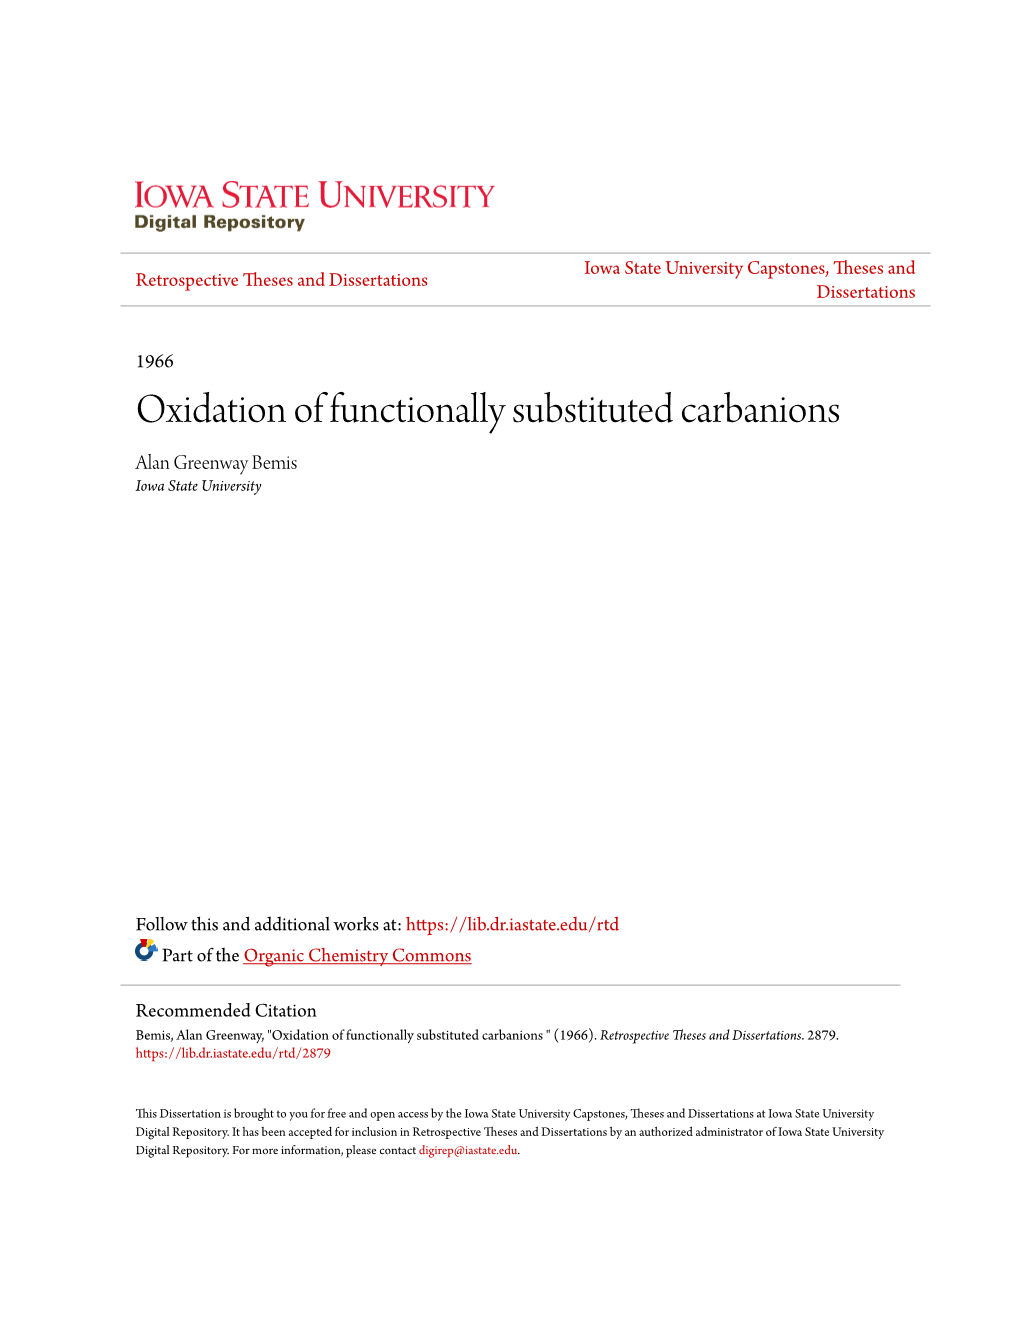 Oxidation of Functionally Substituted Carbanions Alan Greenway Bemis Iowa State University